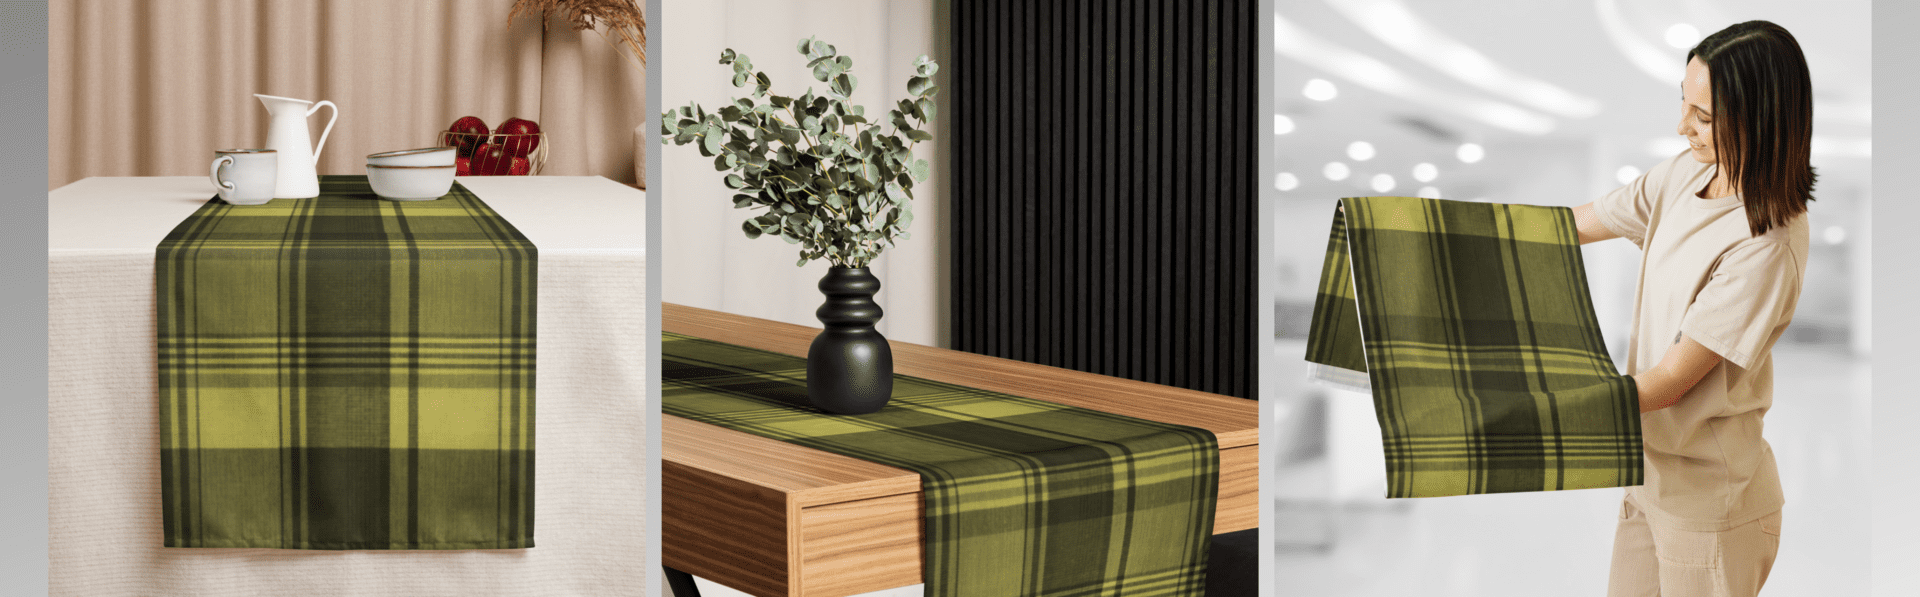 Green and black plaid table runner.